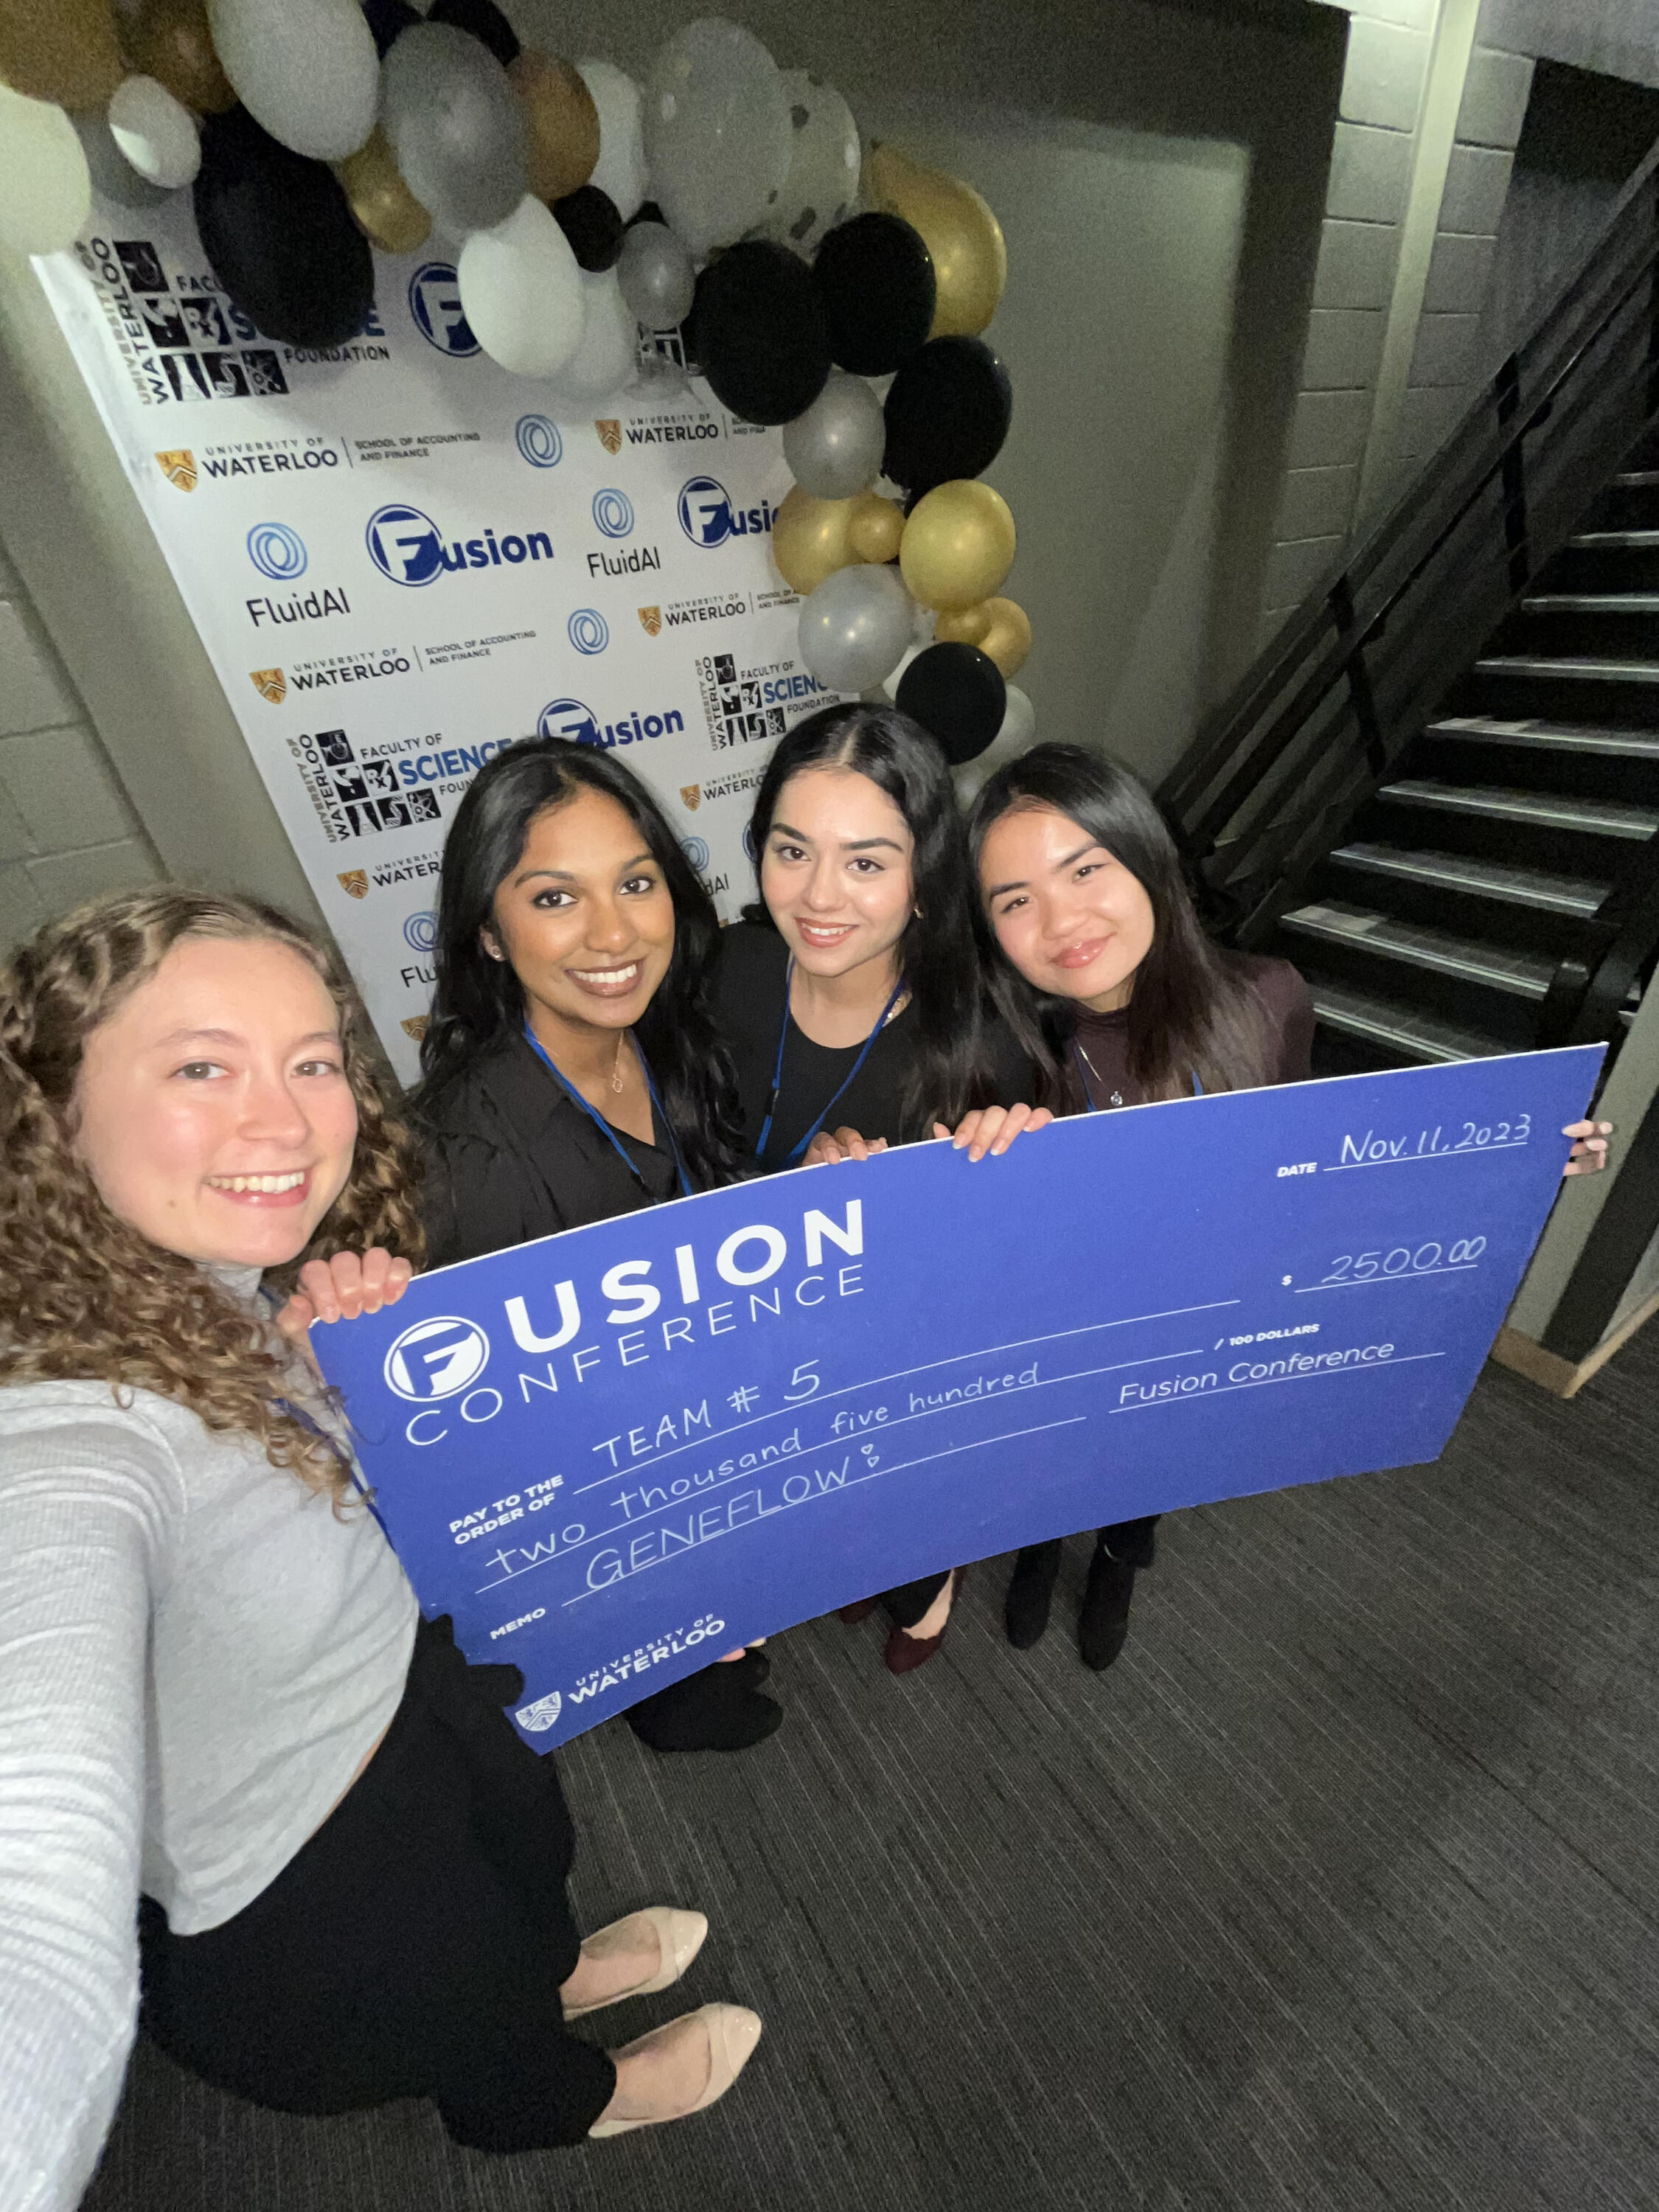 Sophia and her fellow teammates holding a Fusion Conference cheque for 2500 dollars.